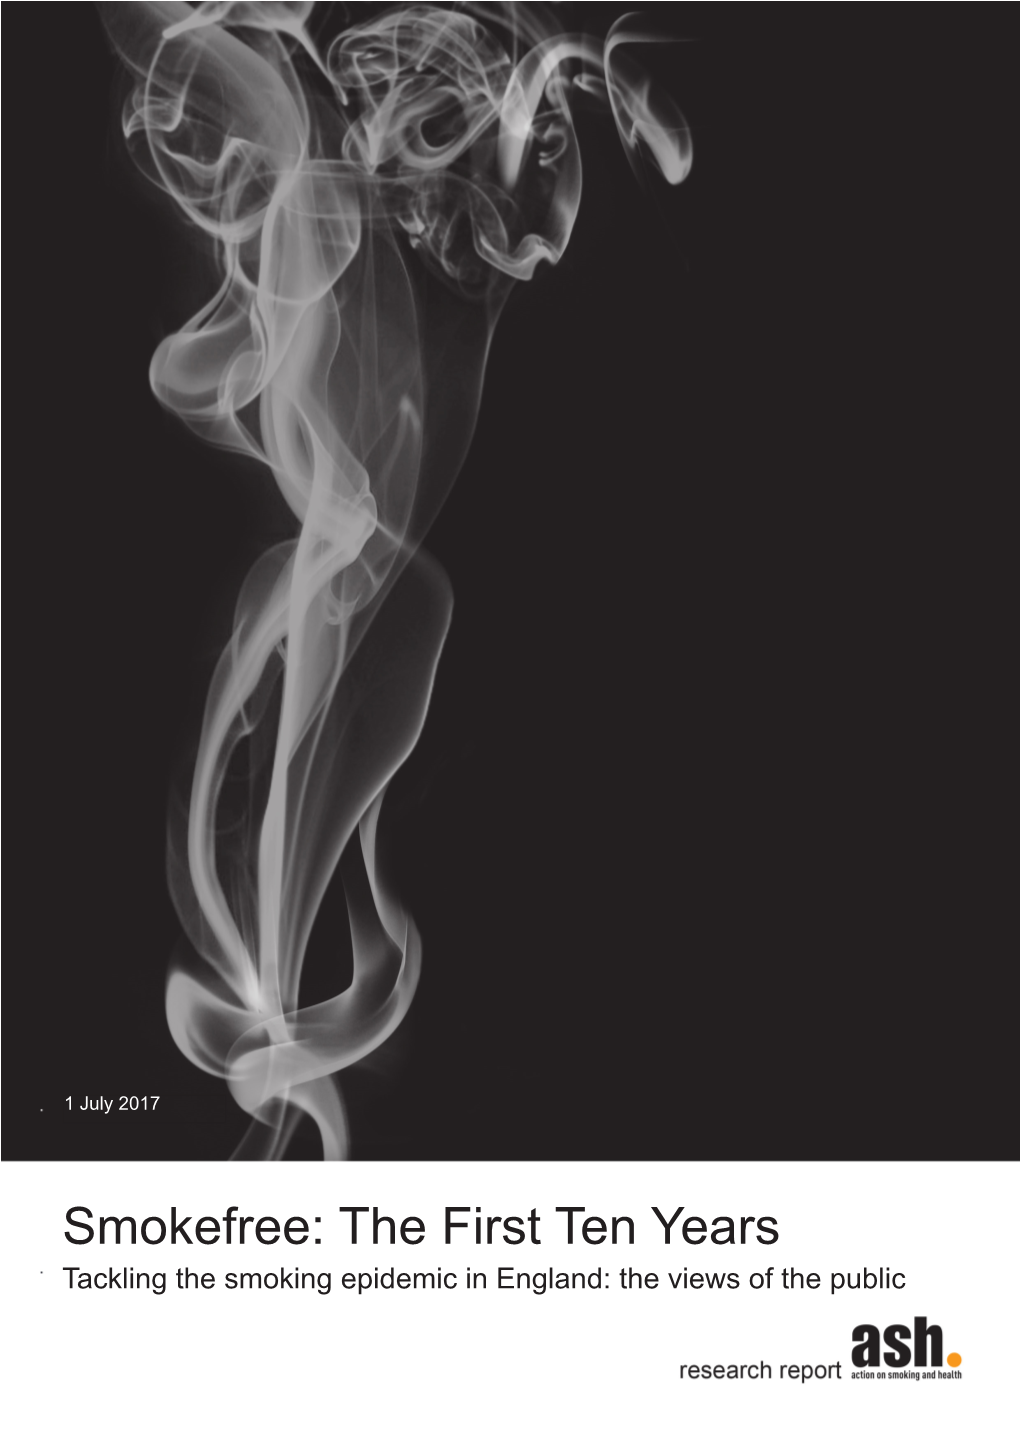 Smokefree: the First Ten Years Tackling the Smoking Epidemic in England: the Views of the Public